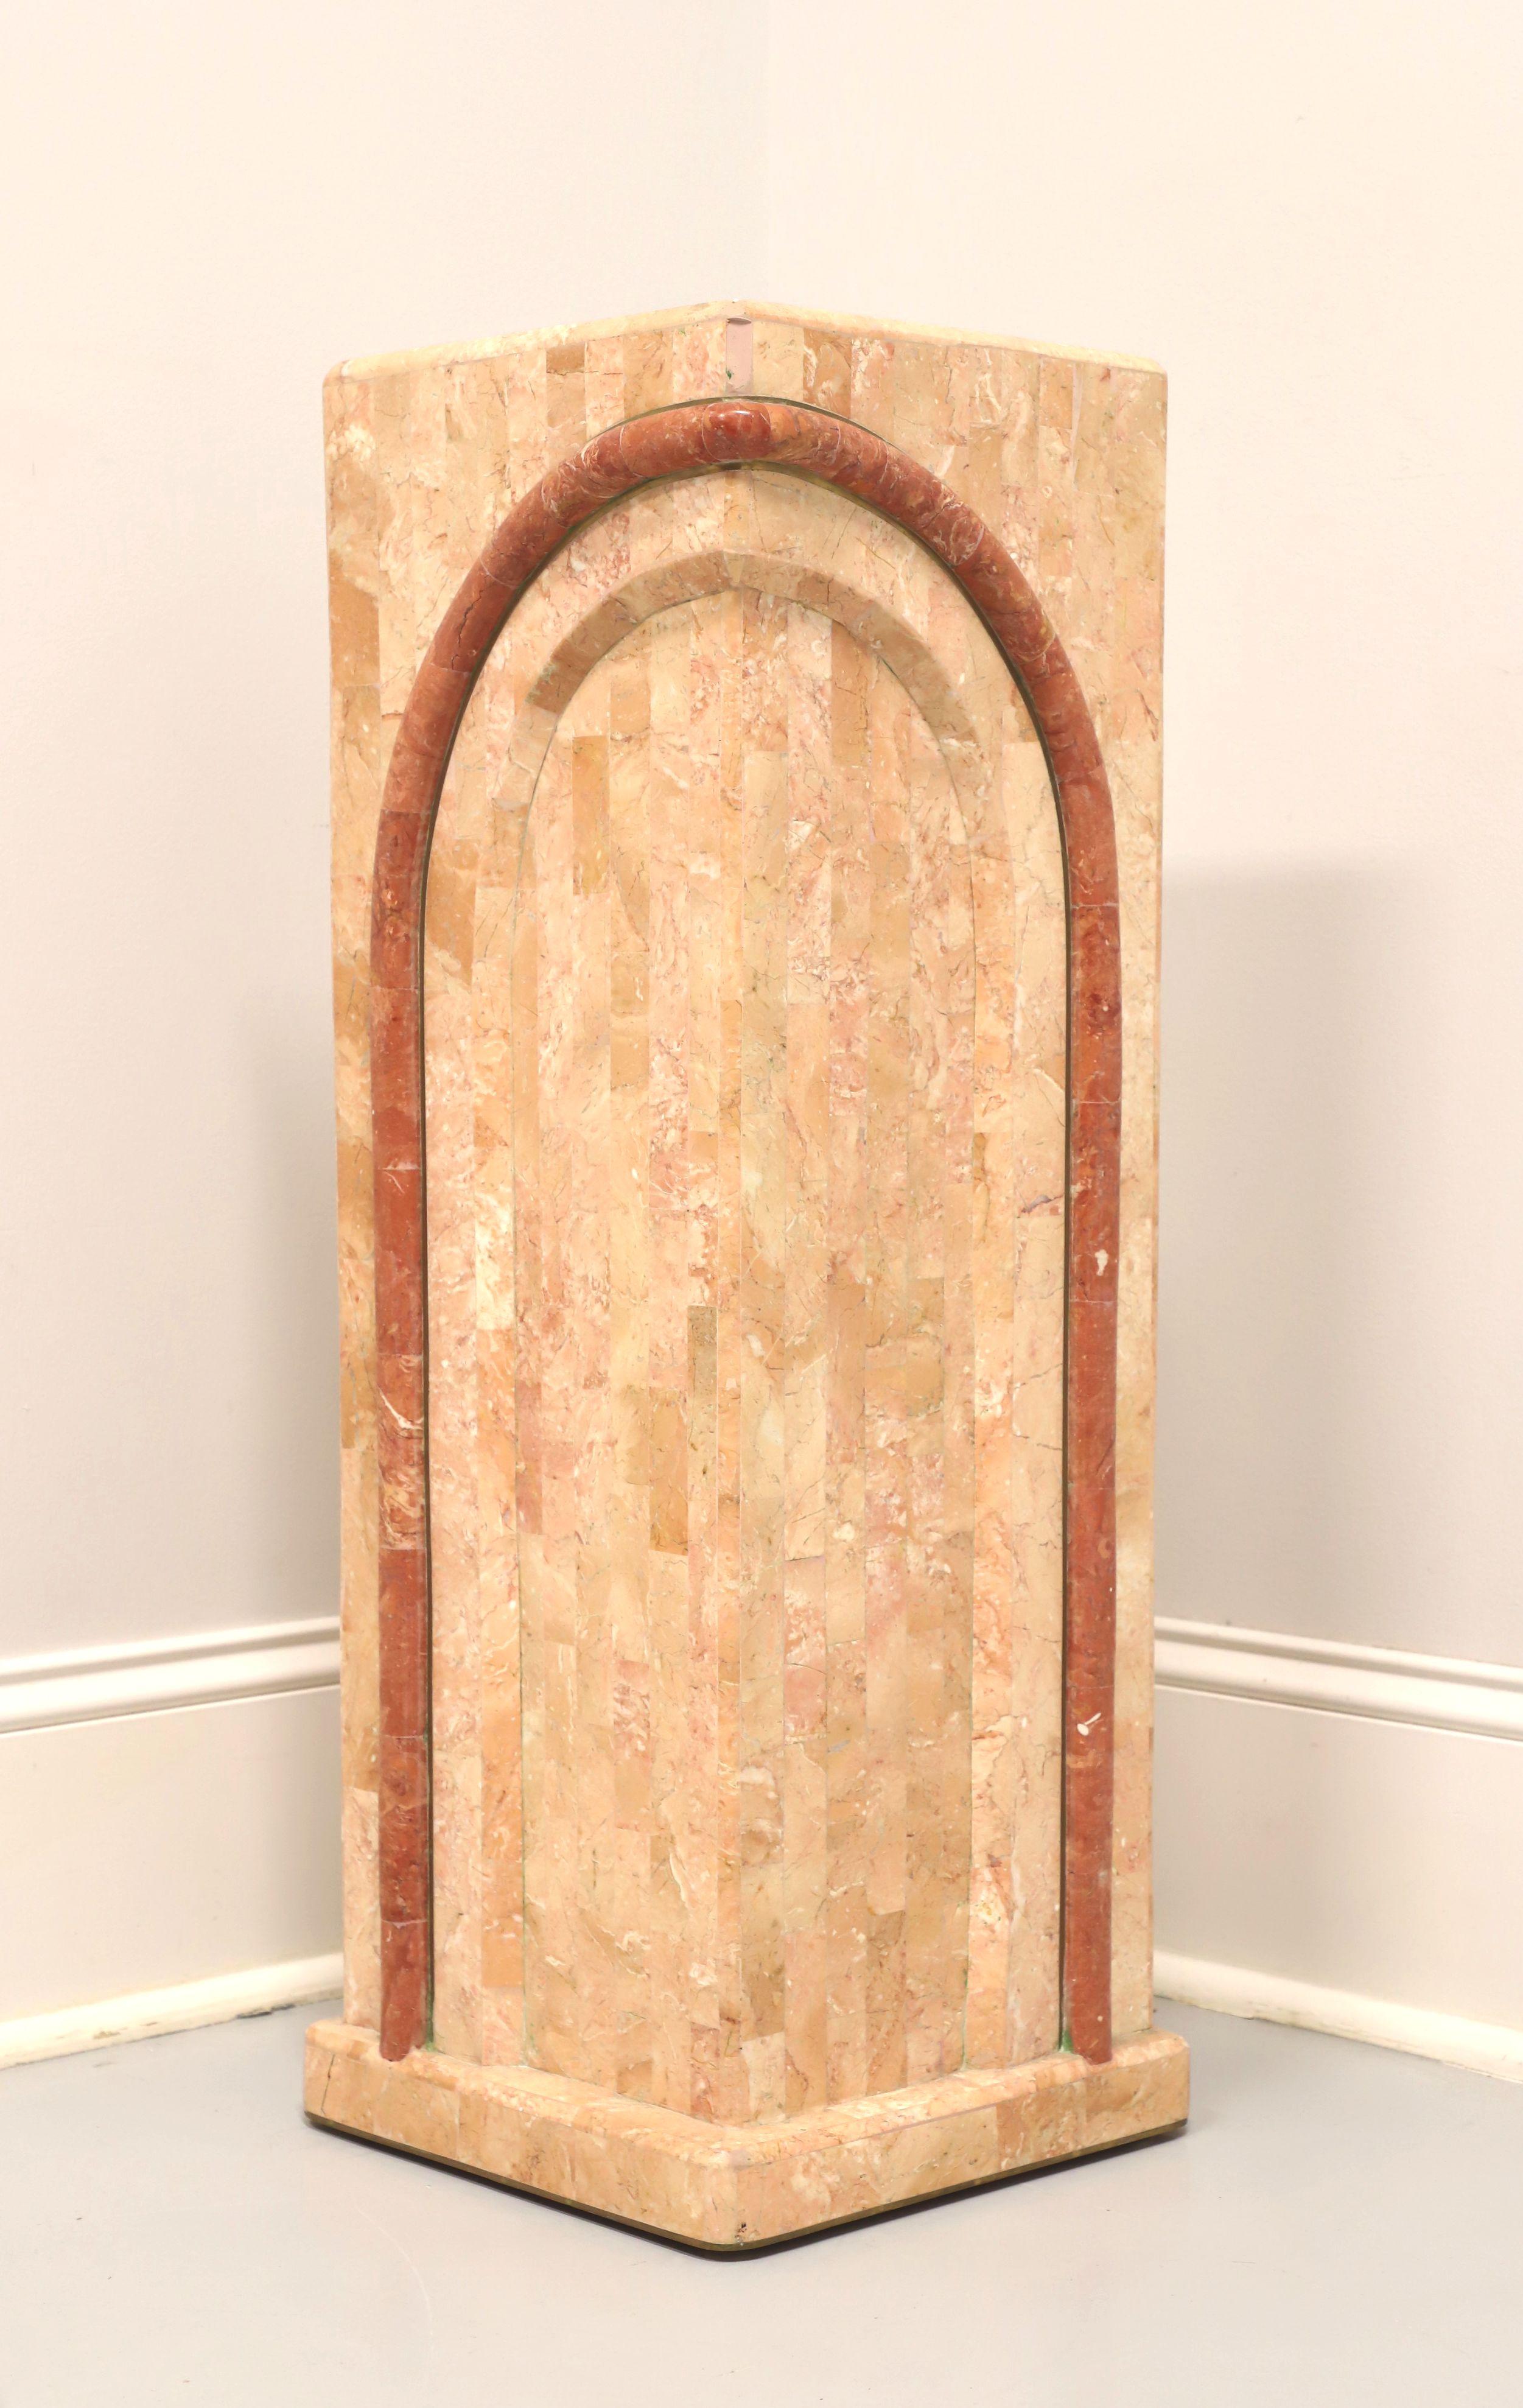 An Art Deco style display column / plant stand by Casa Bique, of Thomasville, North Carolina, USA. Tessellated pink marble forming a mosaic pattern, square shaped, flat surface top with banding of different shades of pink marble, and solid column